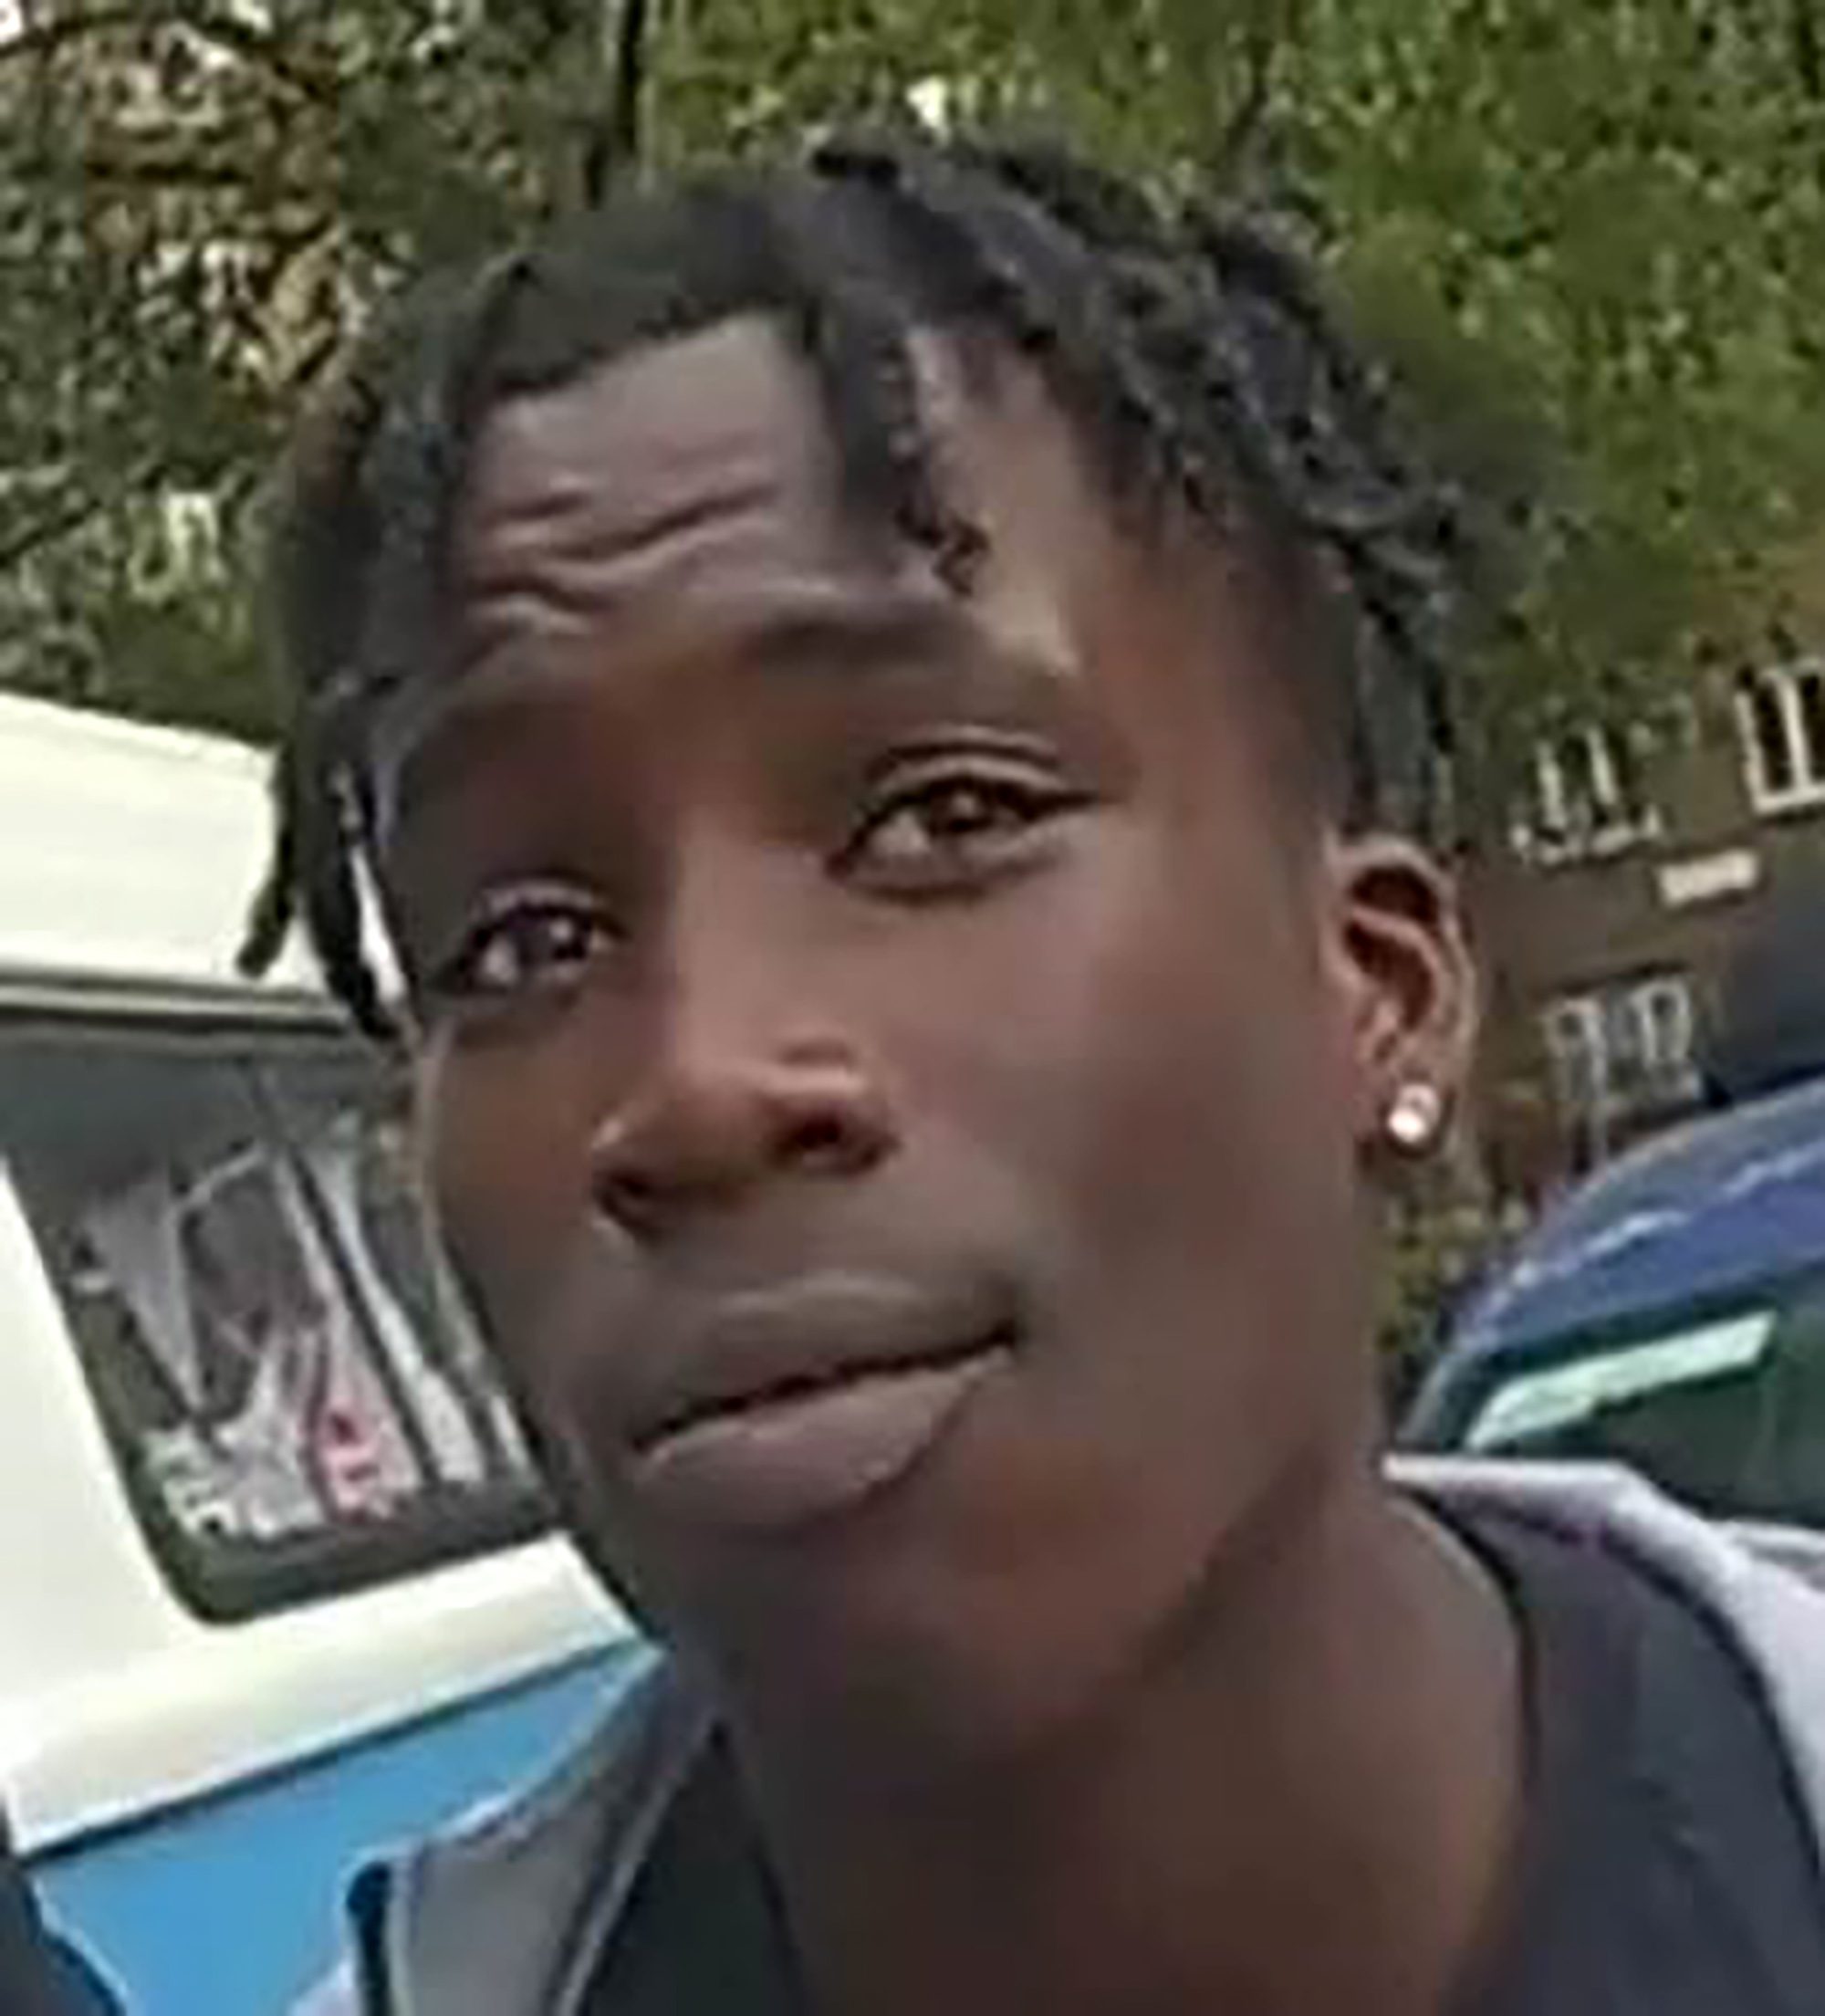 Fifteen-year-old Deshaun James Tuitt who was fatally stabbed at Highbury Fields, north London, shortly before 9pm on Thursday, August 4, 2022. (Metropolitan Police,SWNS.COM/Zenger)